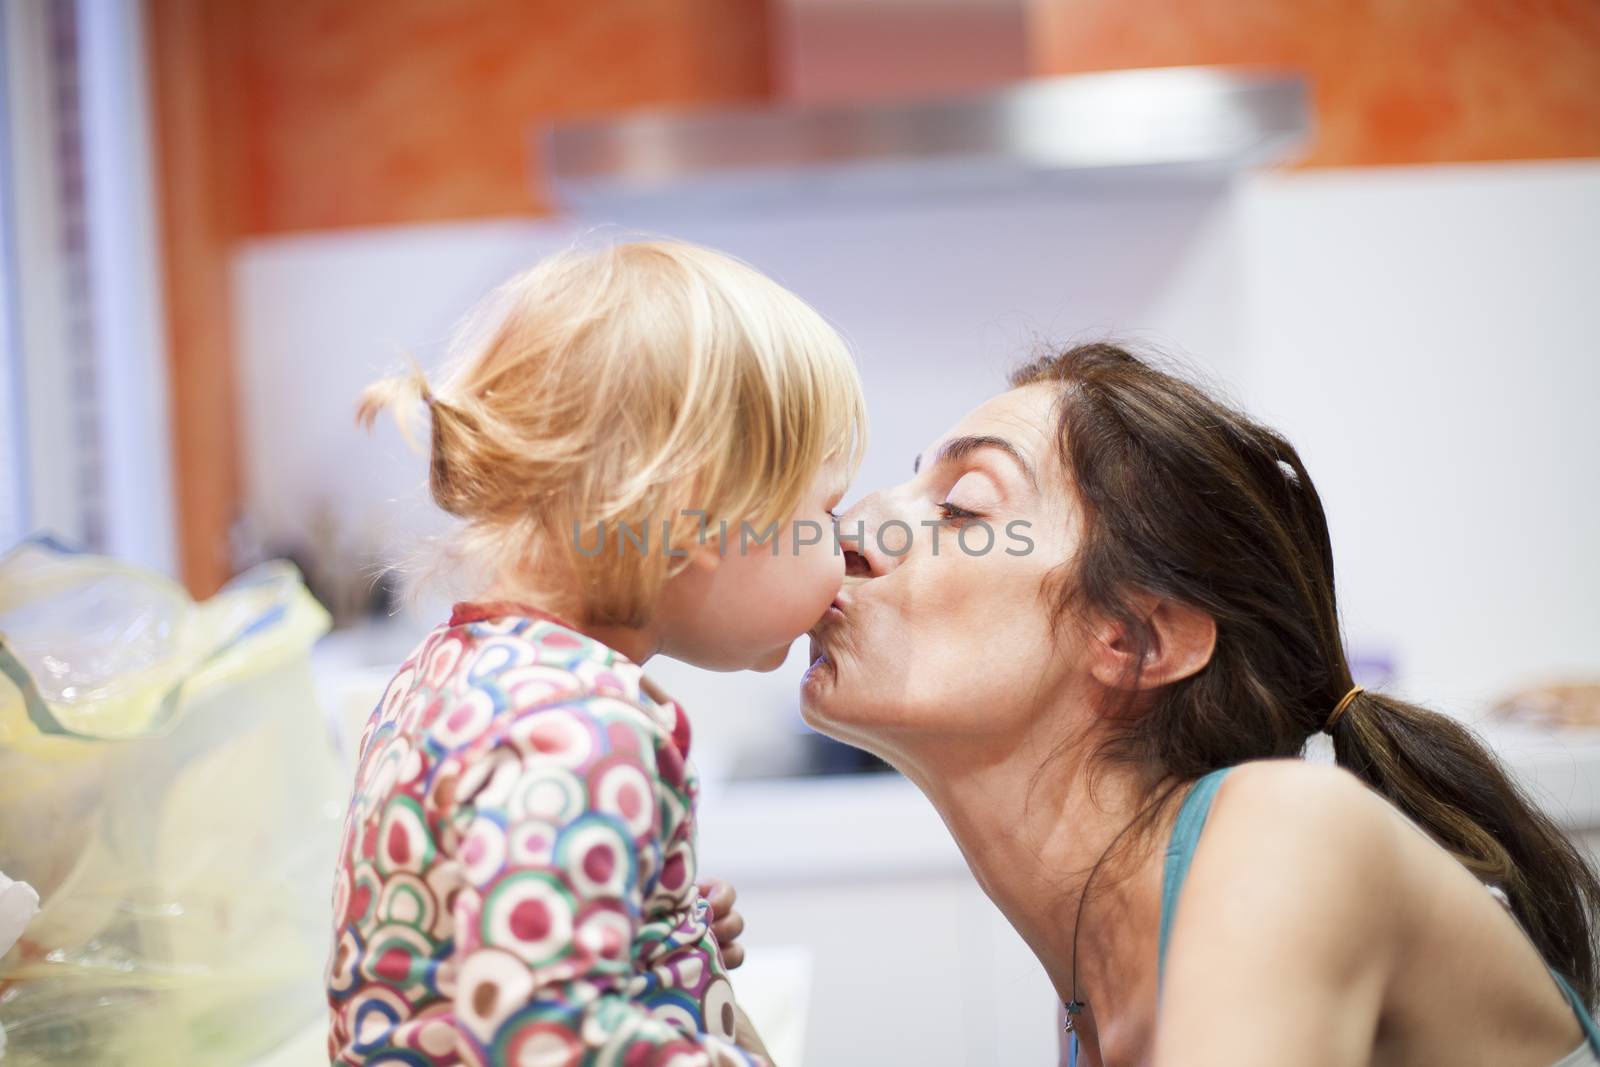 baby and mom kissing in kitchen by quintanilla